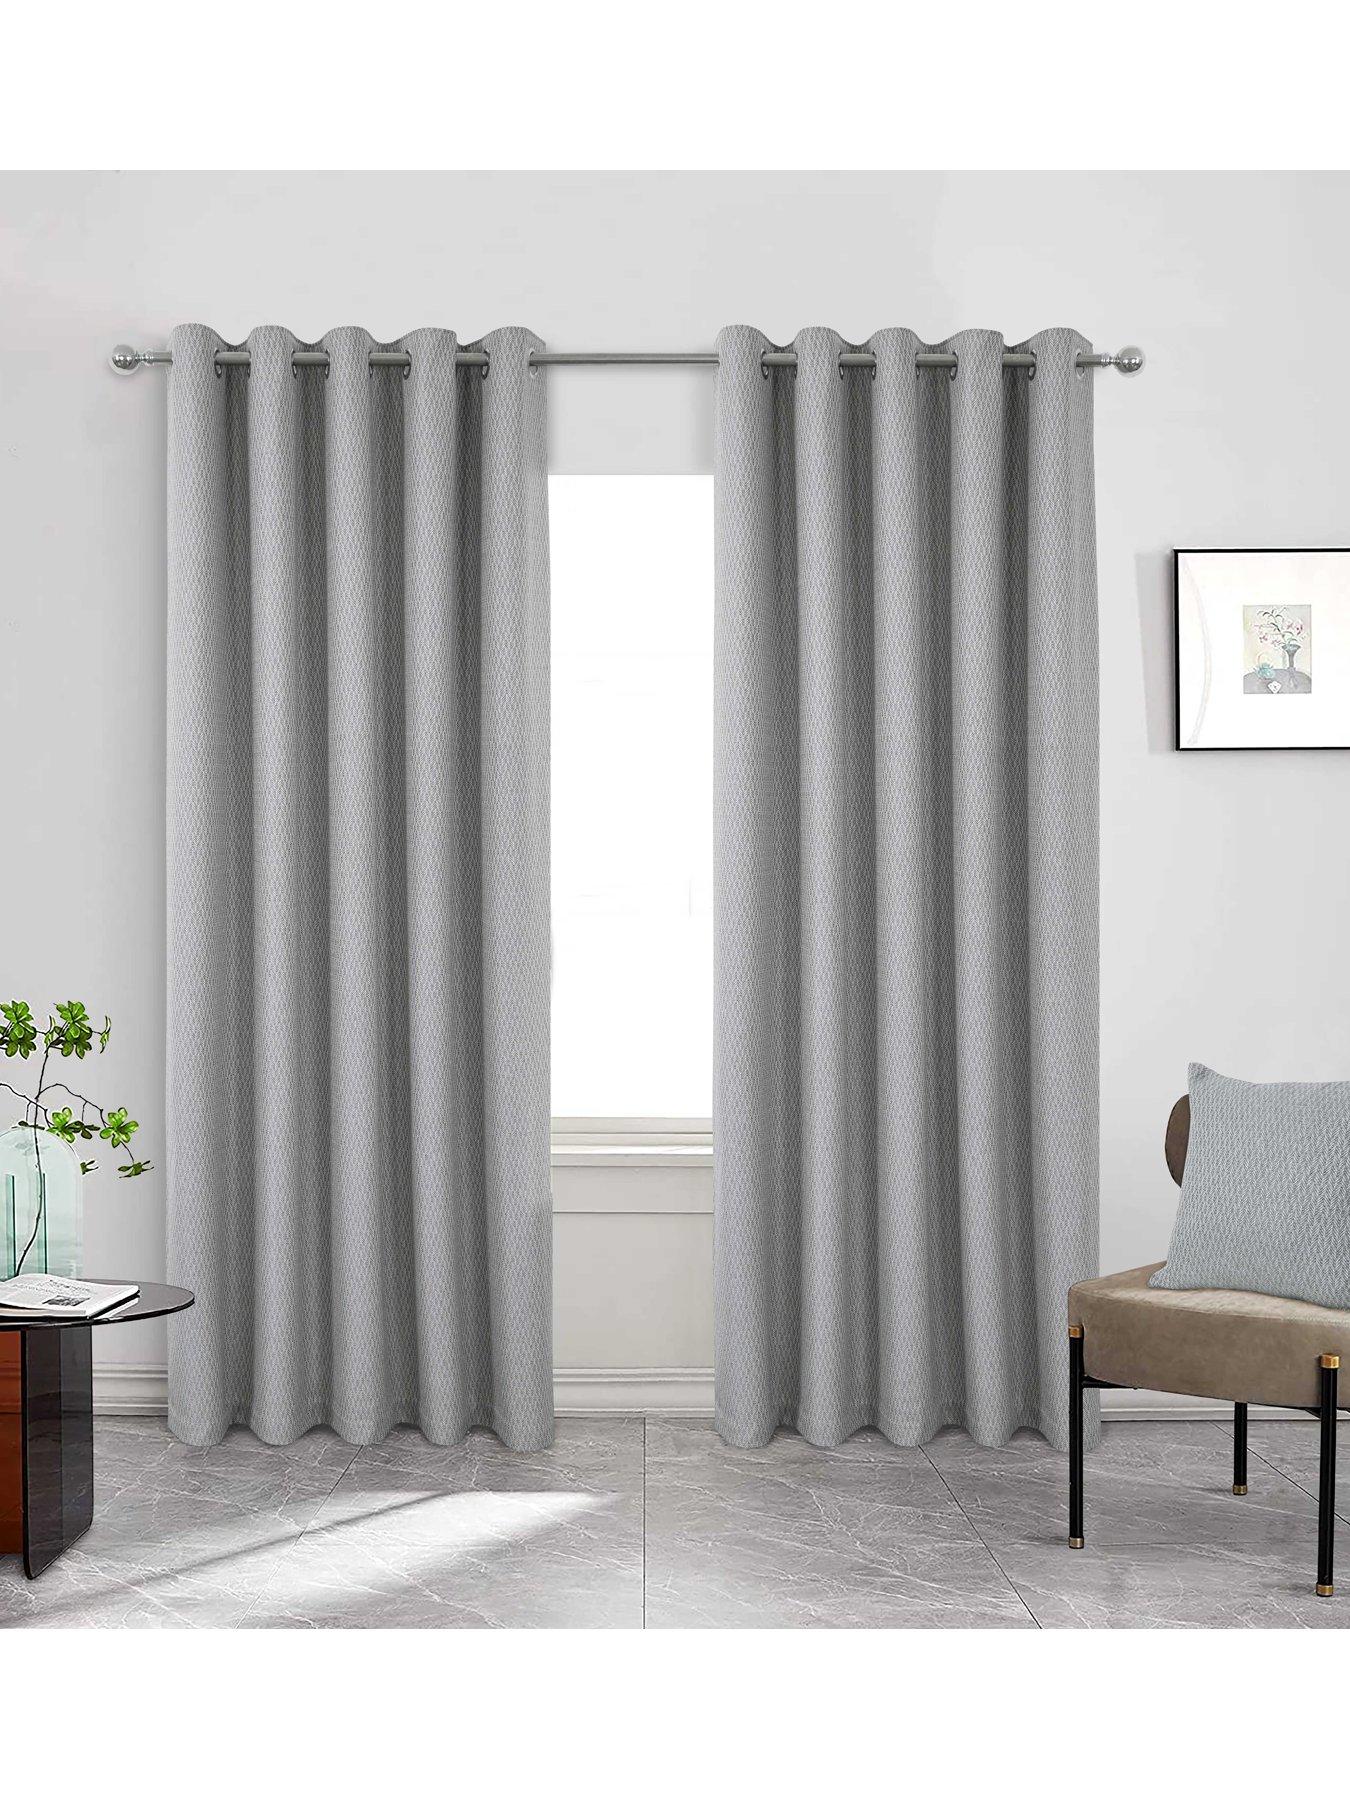 PAIRS OF SILVER SHIMMERY OAK TREES LIGHT GREY THICK VELVET LINED